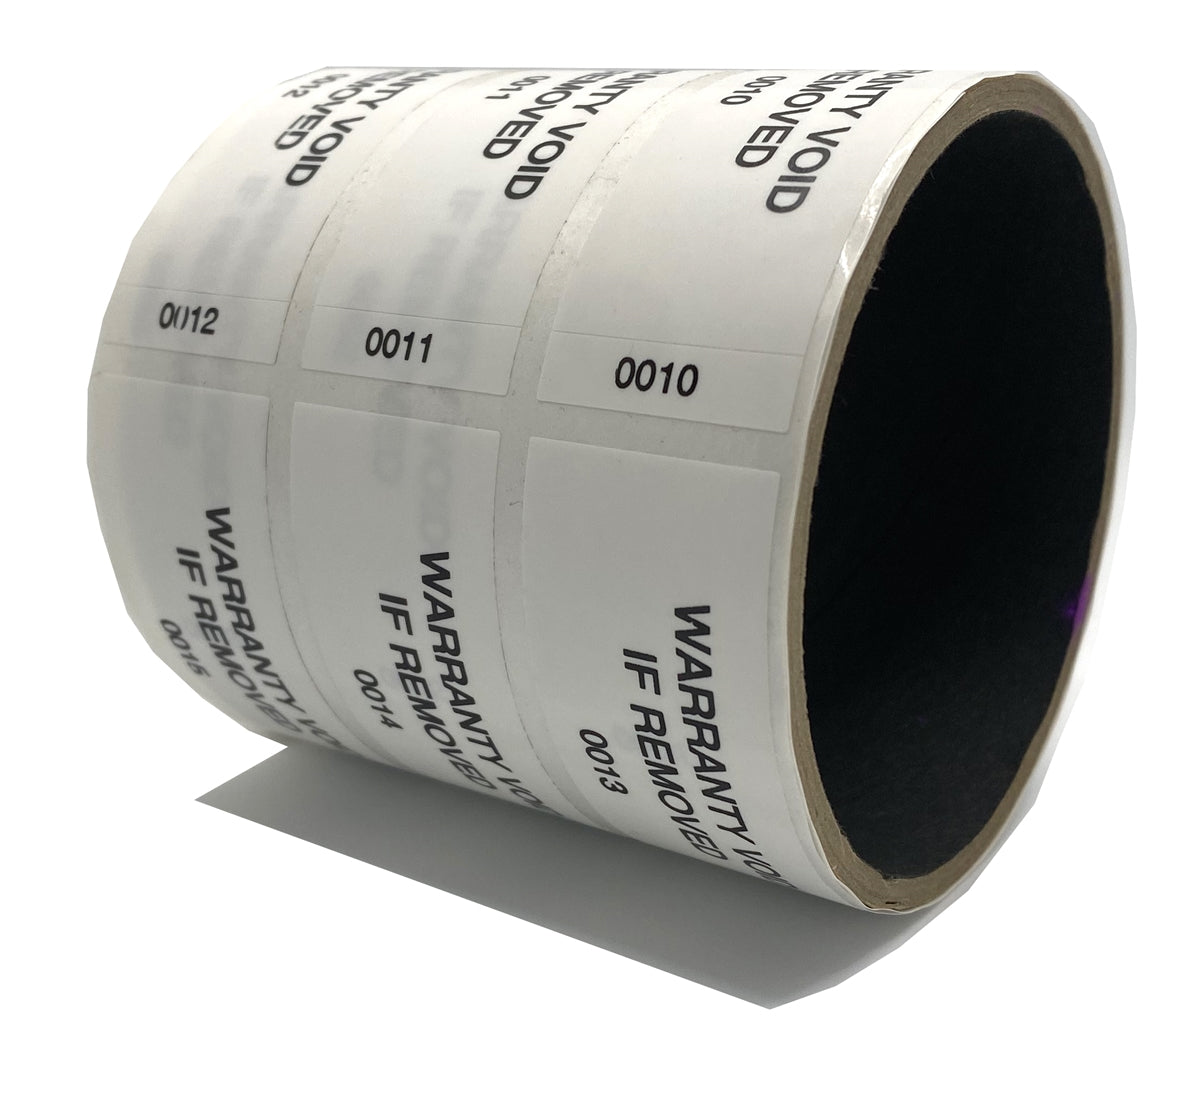 1,000 Tamper Evident White Non Residue Security Labels TamperGuard® Seal Sticker, Rectangle 2.75" x 1" (70mm x 25mm). Printed: Warranty Void if Removed + Serialized